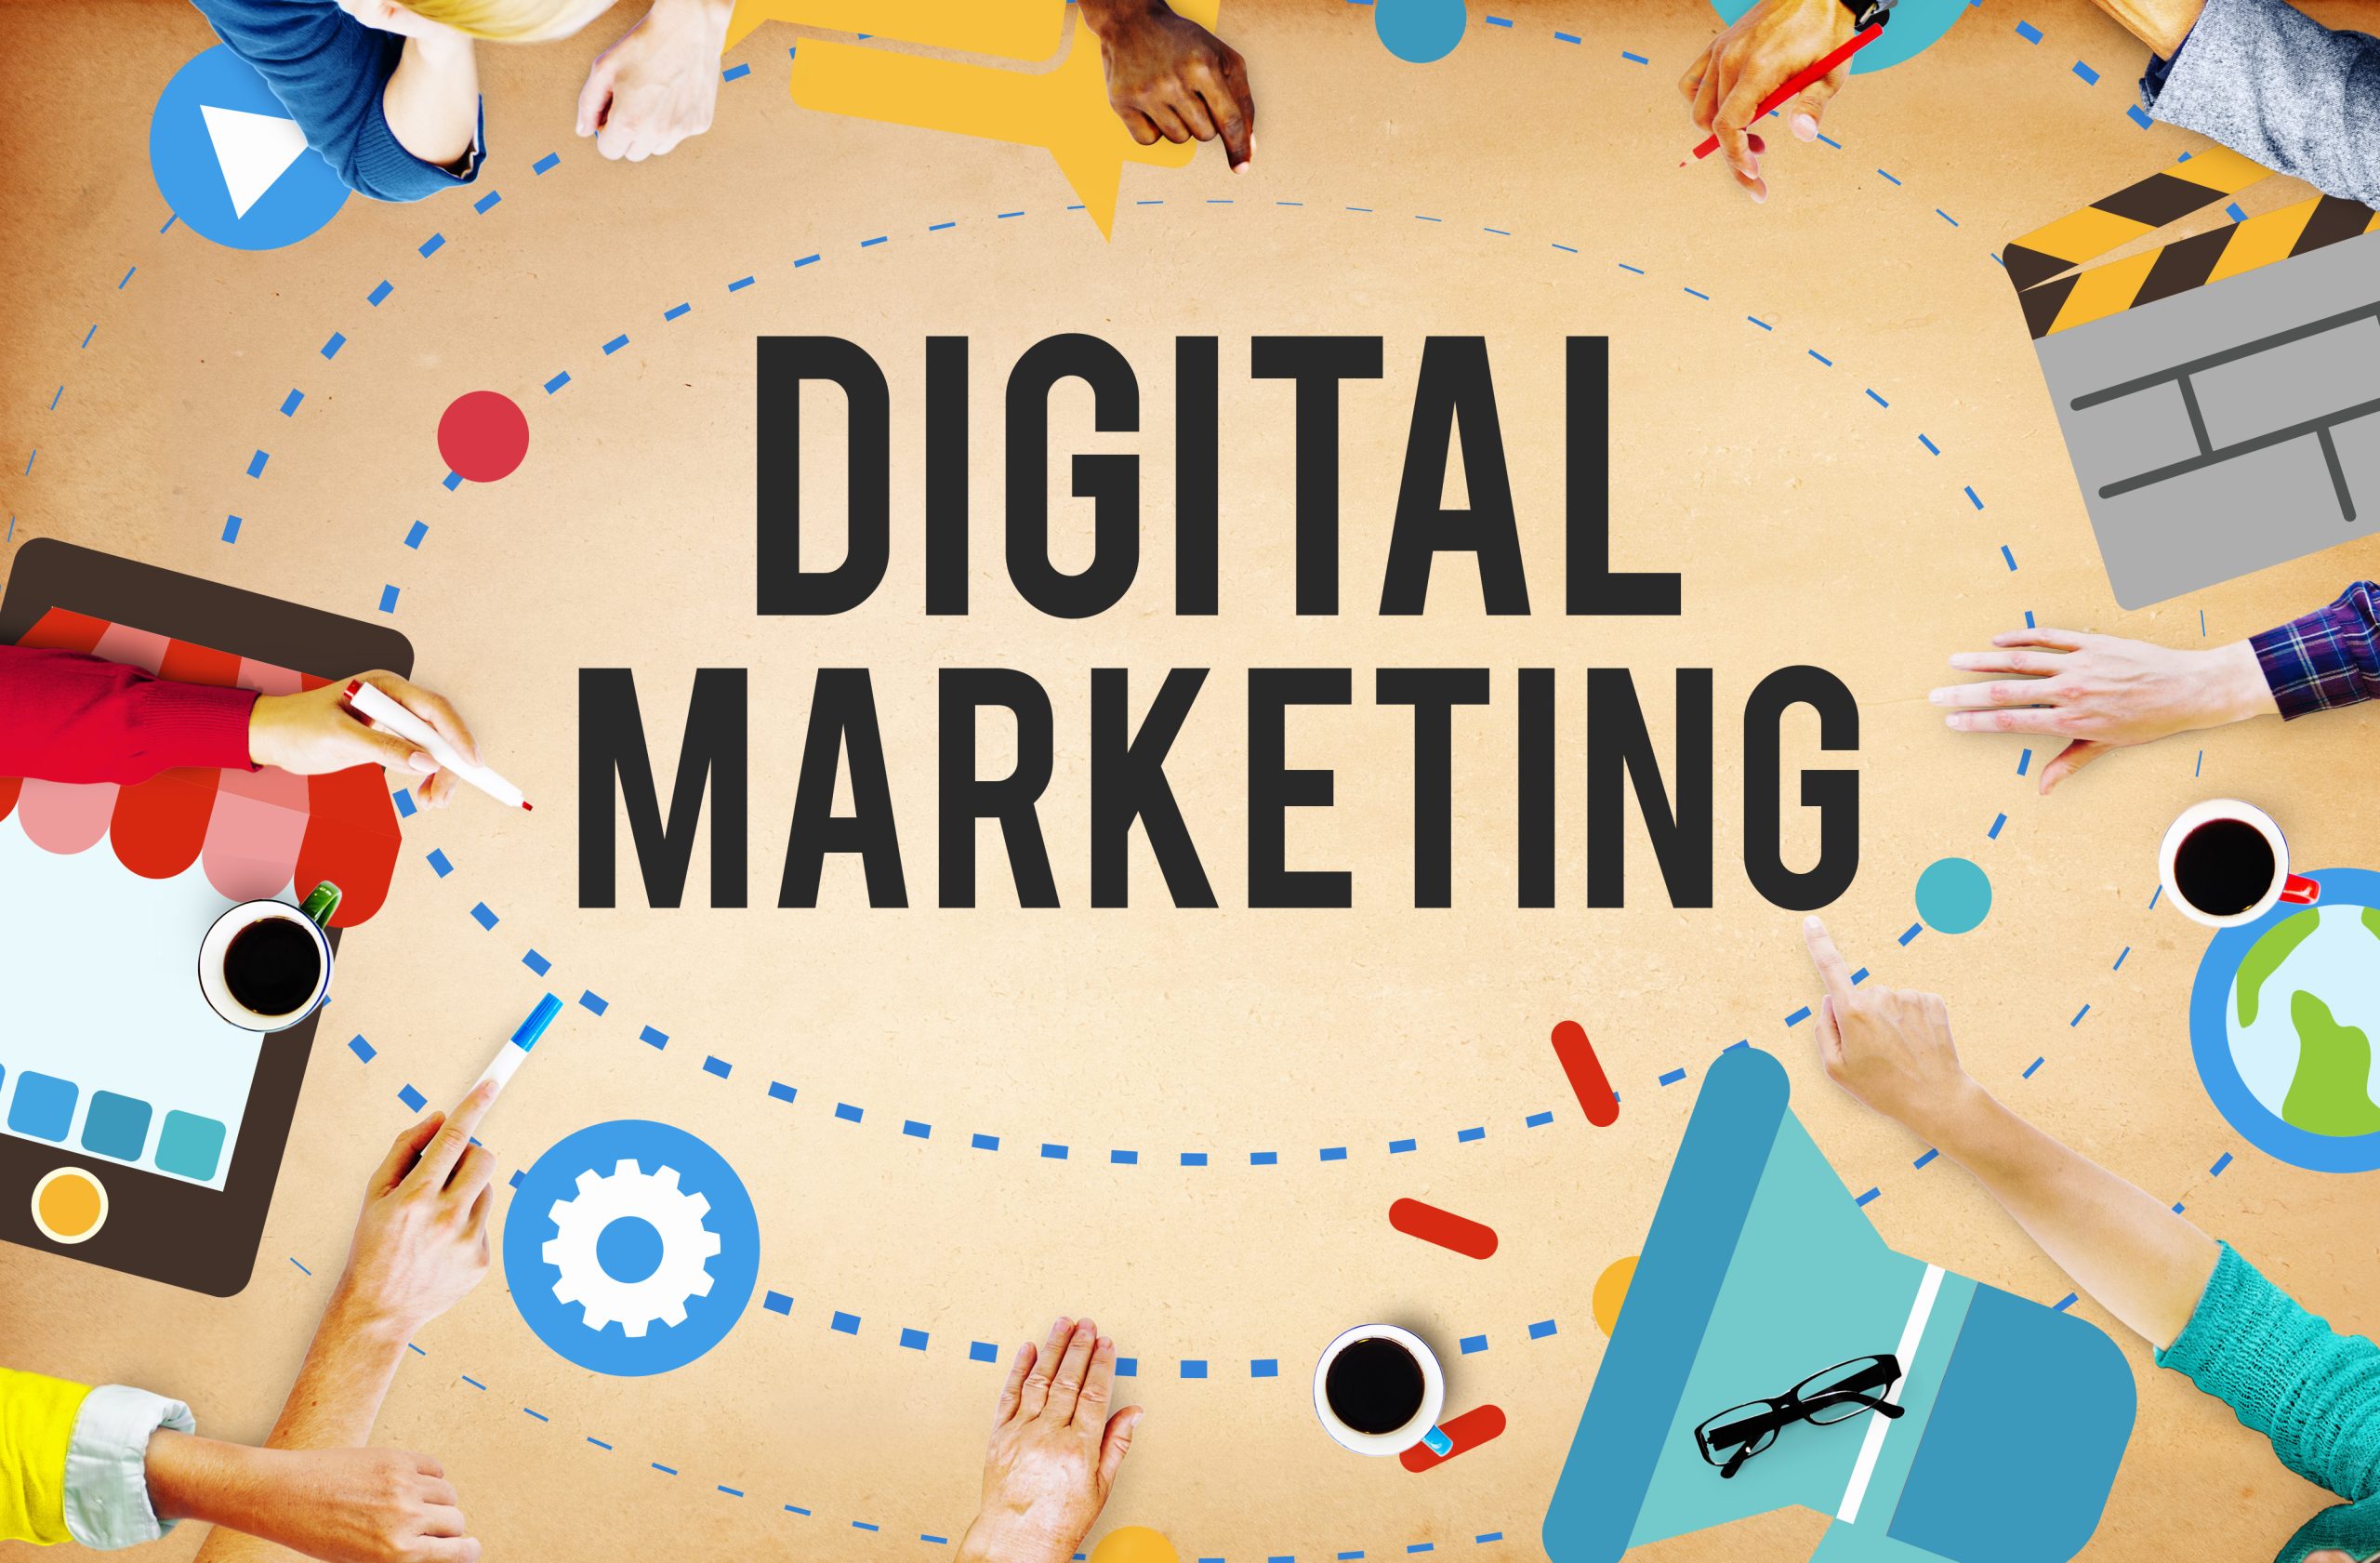 7 Reasons Why Digital Marketing Is Important for Startups